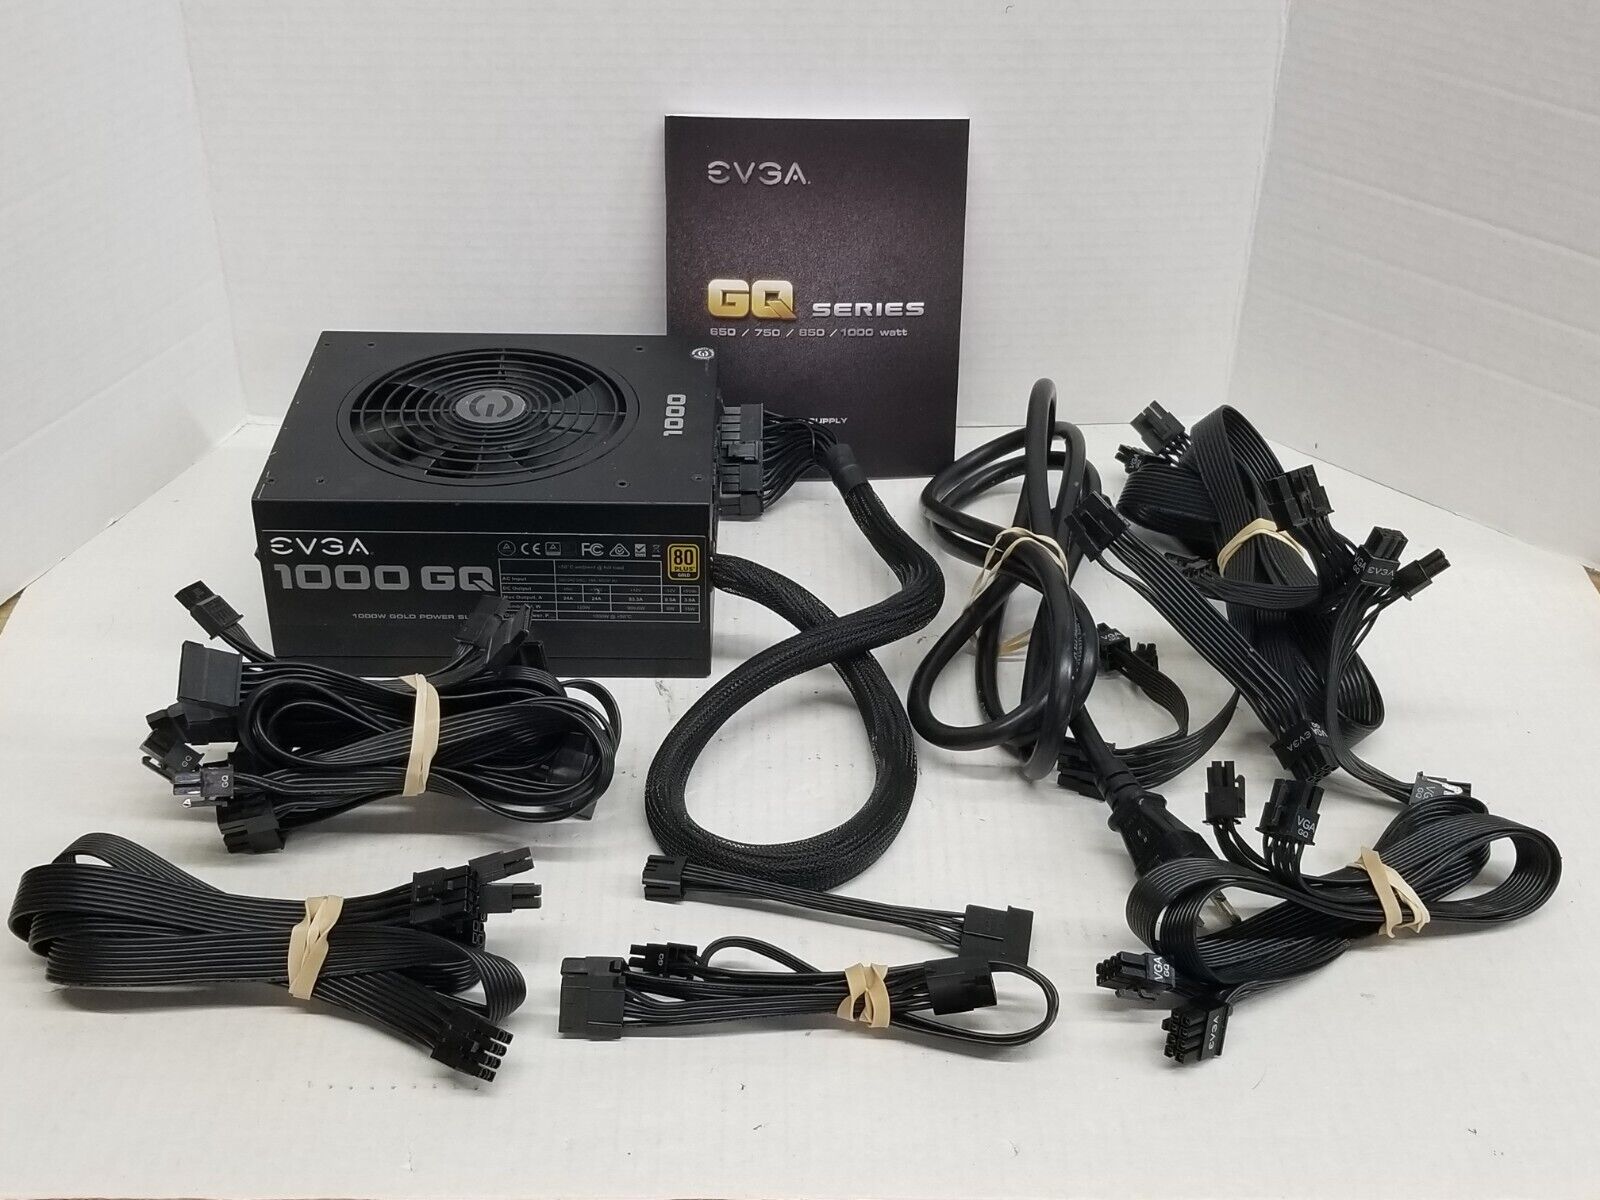 EVGA 1000 GQ Desktop Power Supply with Full Set of Cables